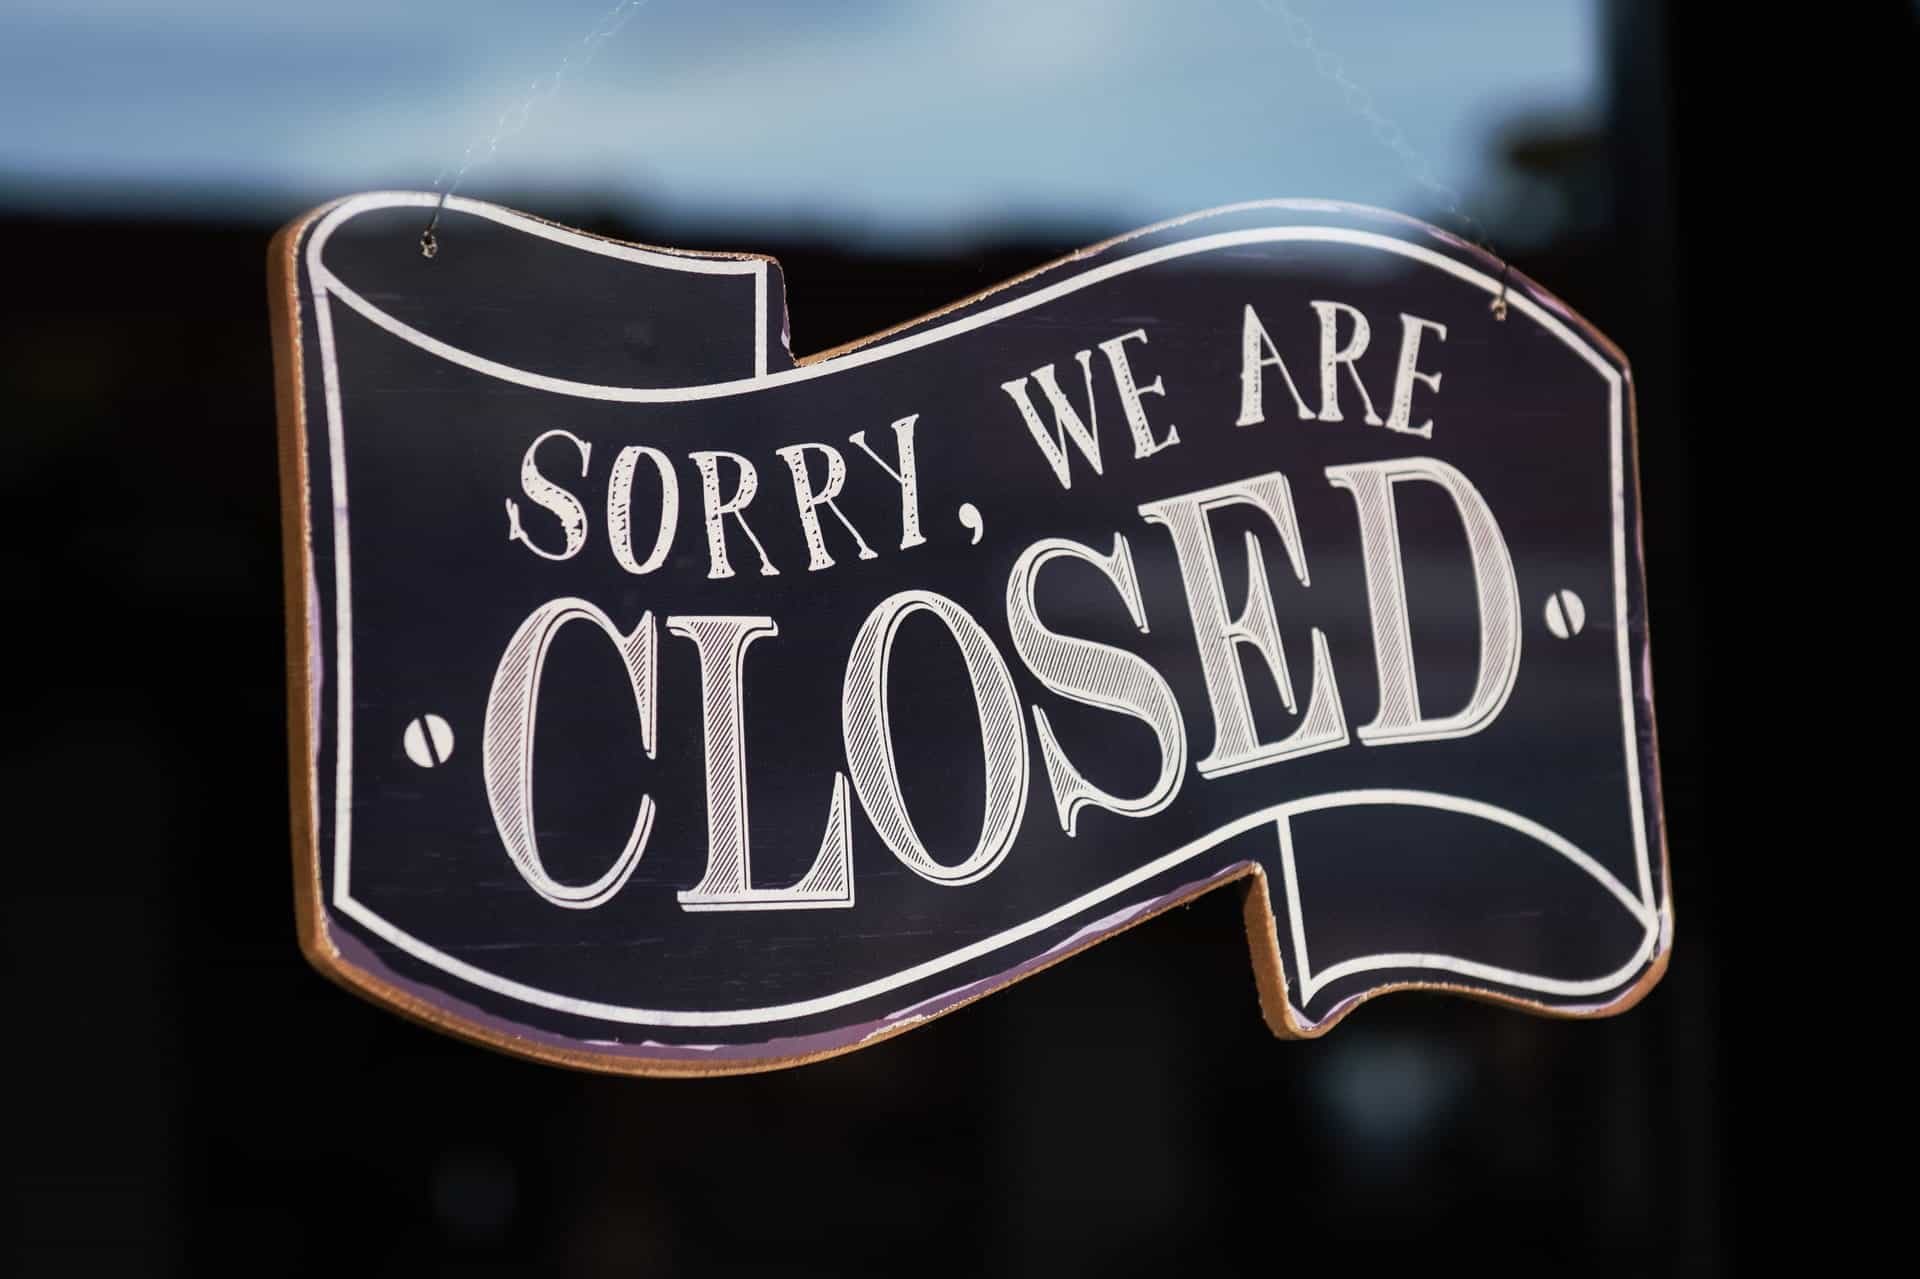 A black and white sign reads "SORRY, WE’RE CLOSED" on a window.